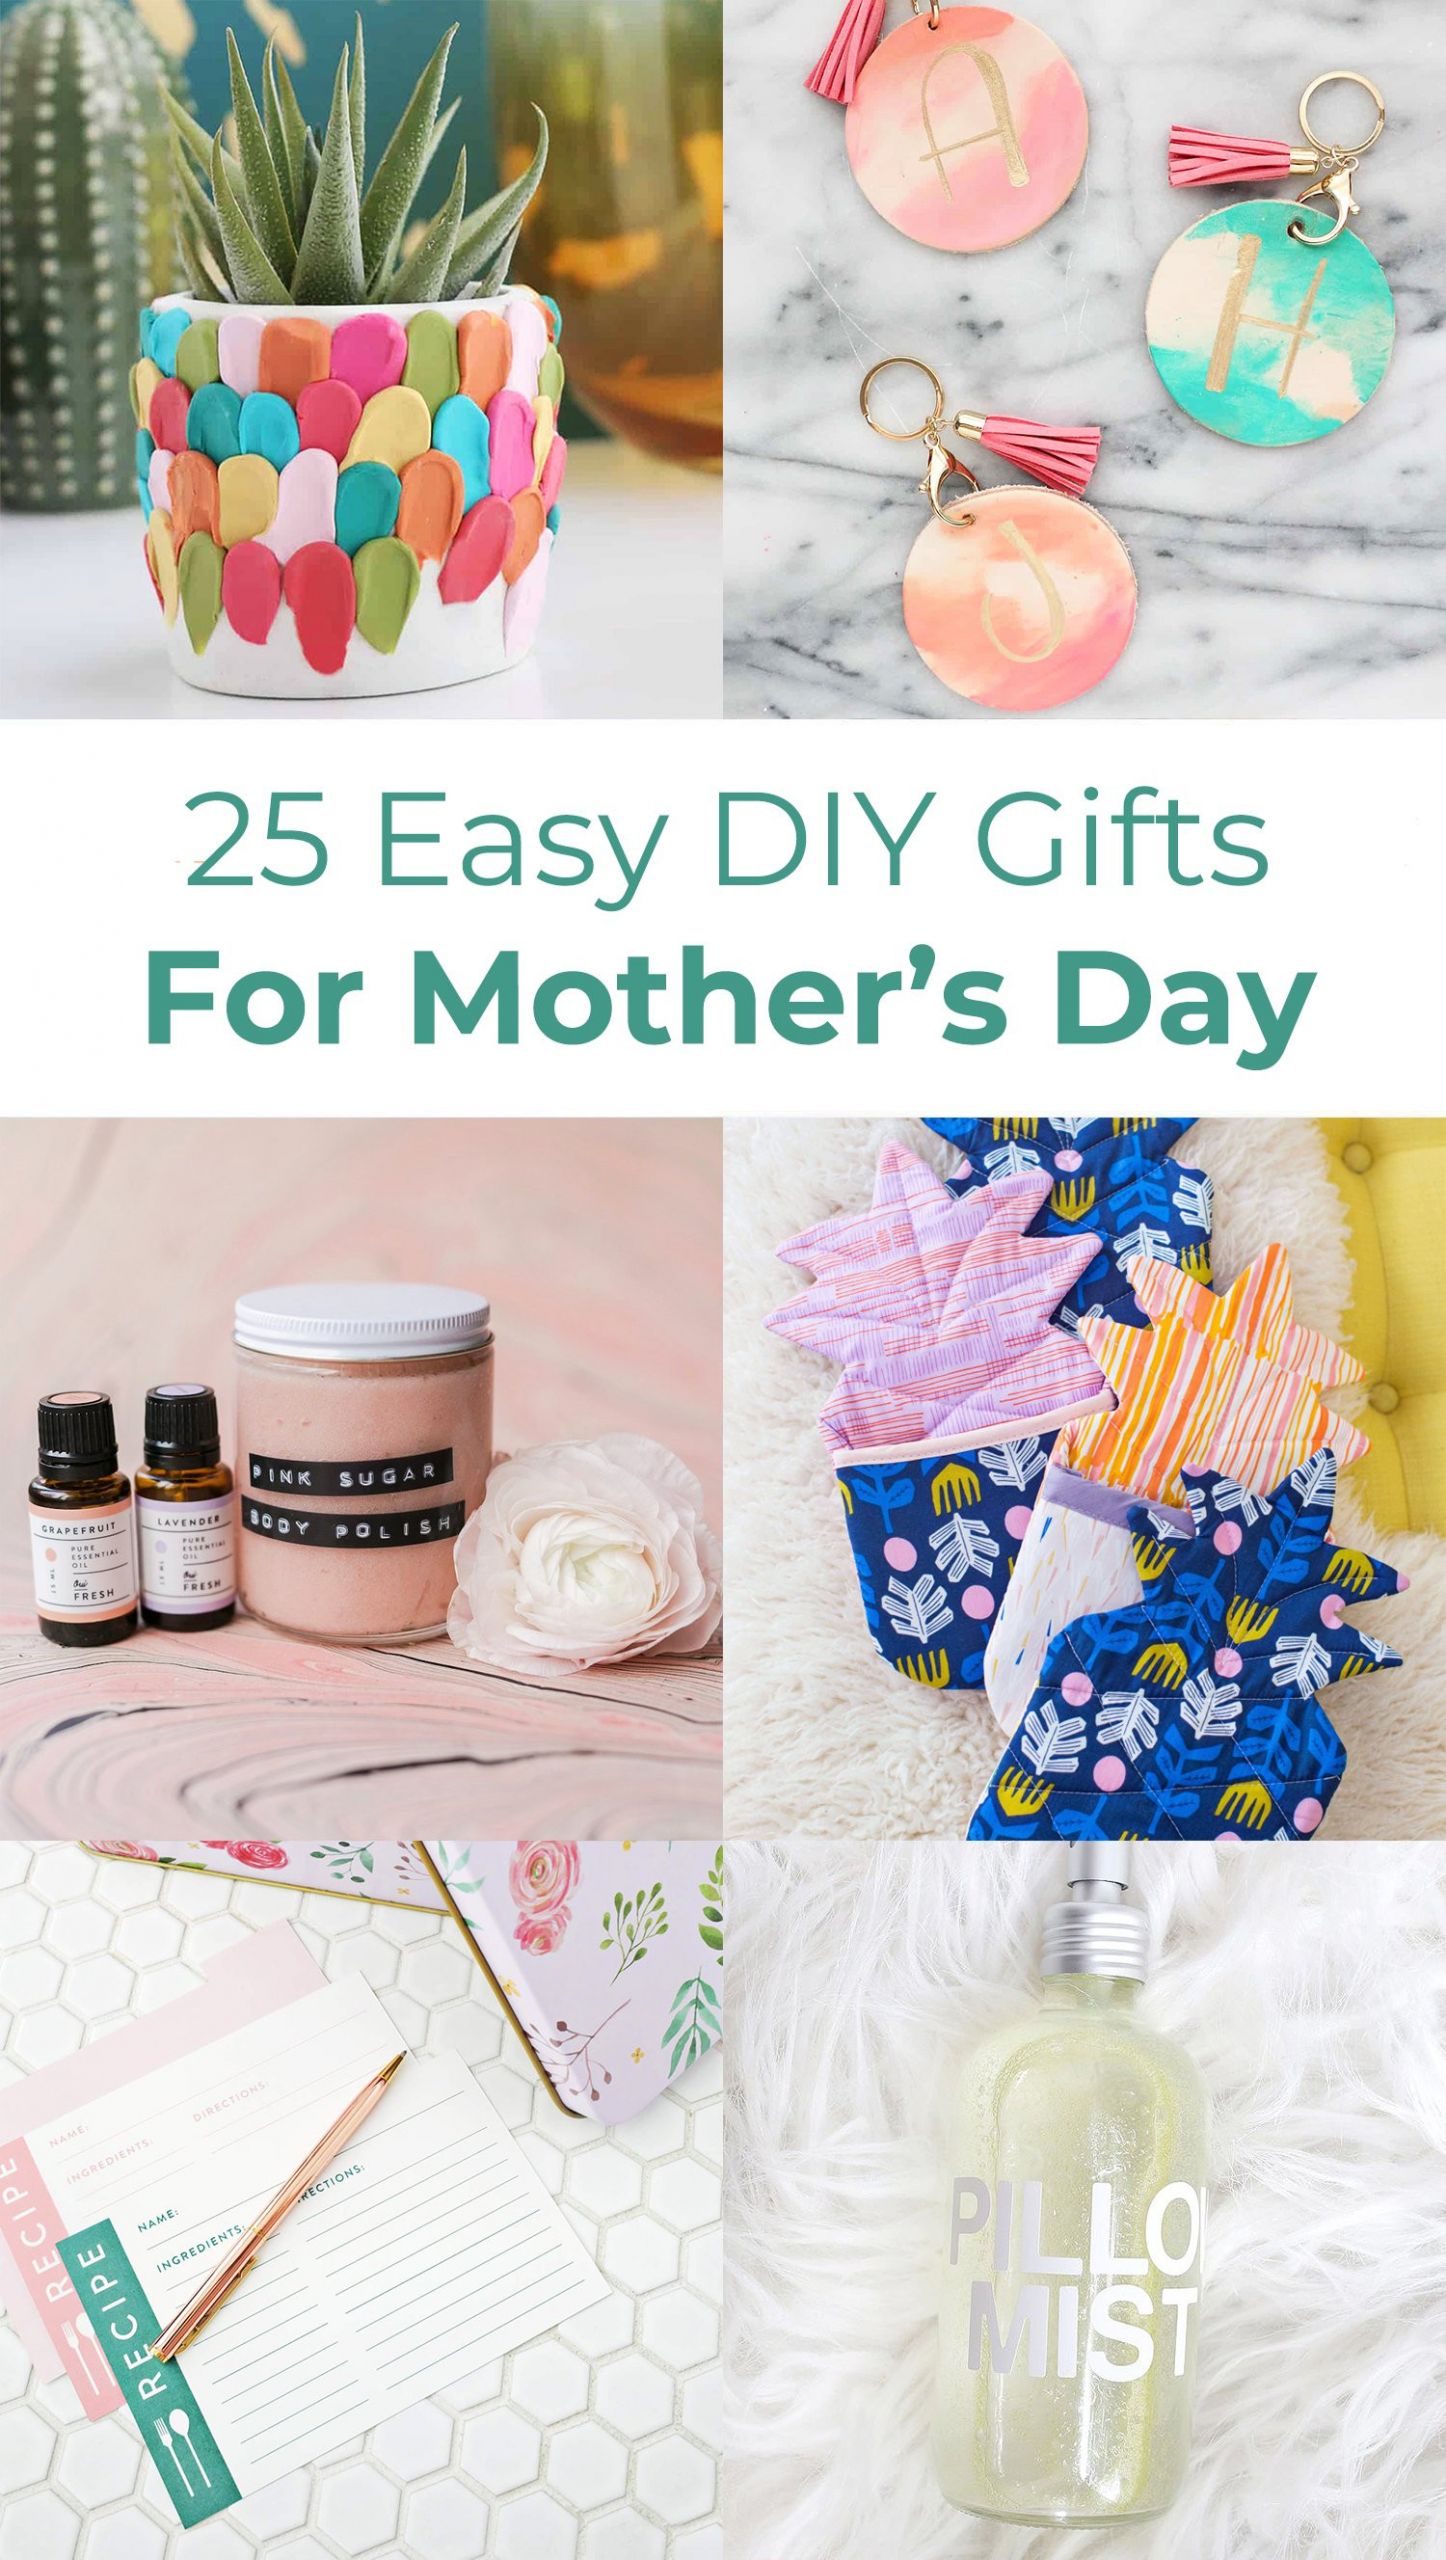 Easy Diy Mother'S Day Gift Ideas
 25 Easy DIY Gift Ideas For Mother’s Day